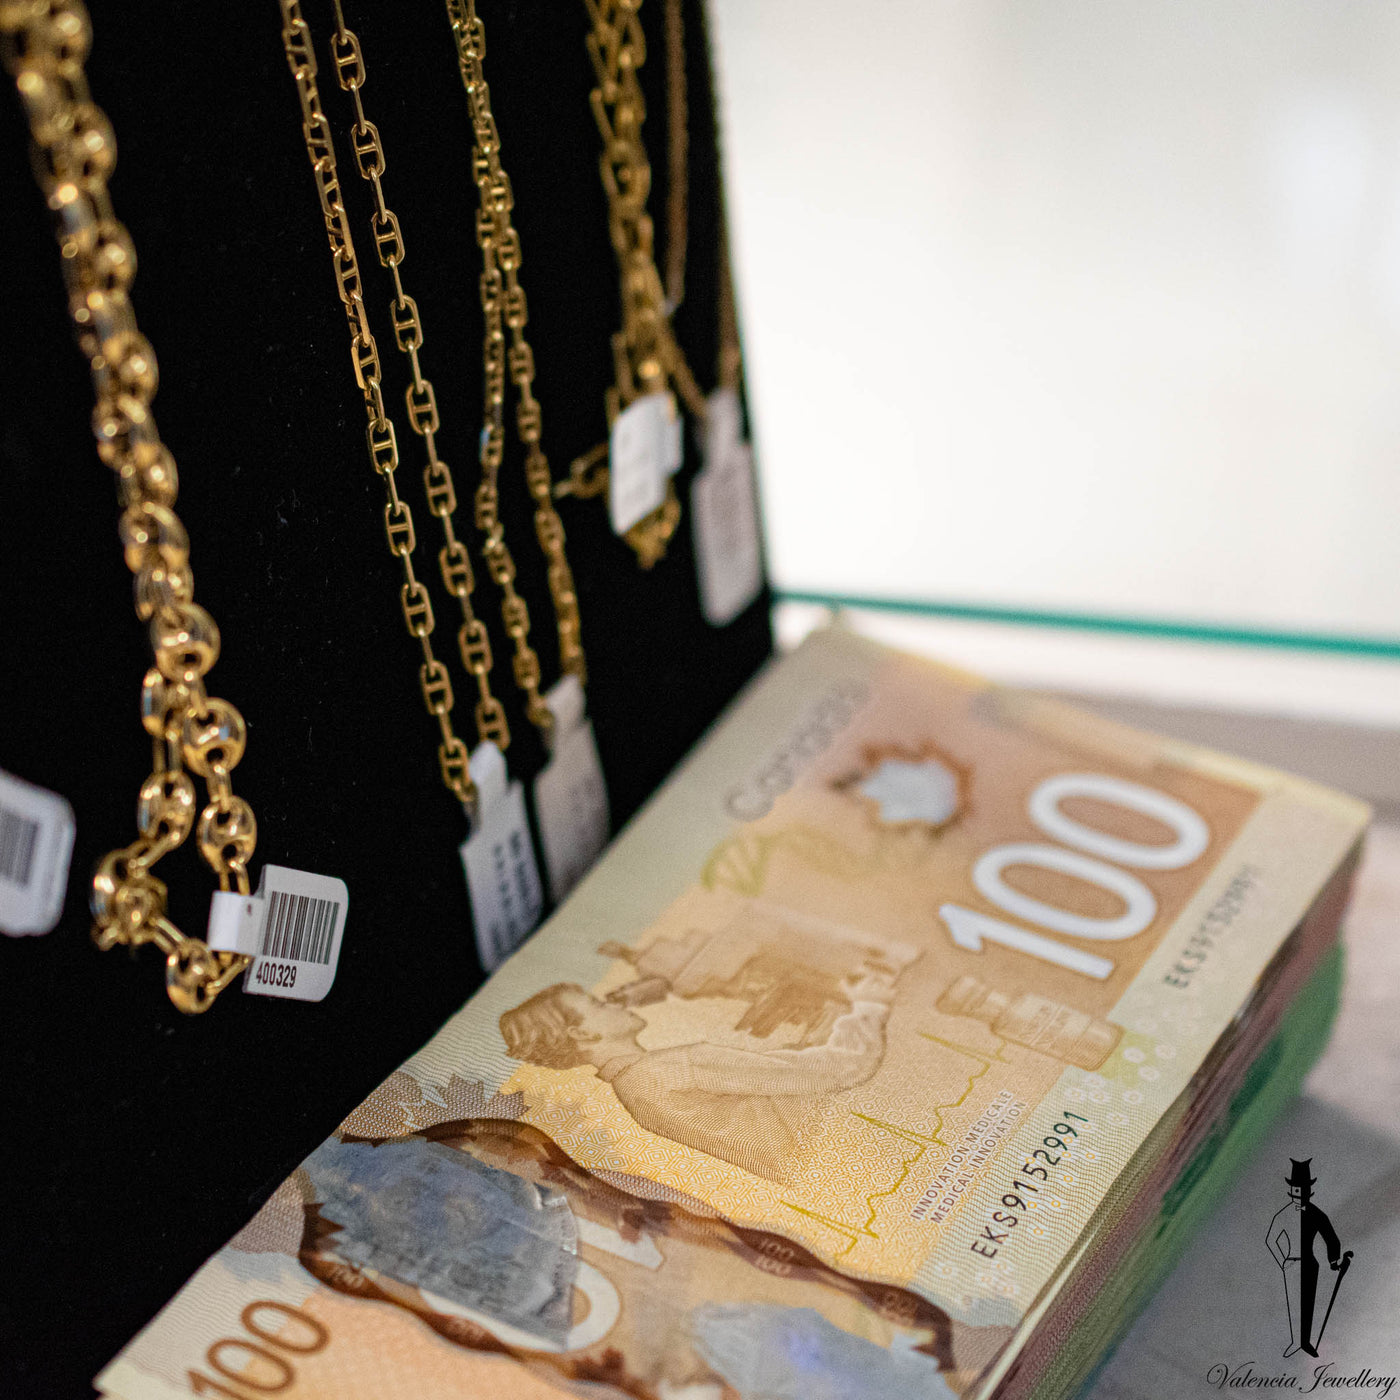 A stack of Canadian 100 dollar bills beside gold chains